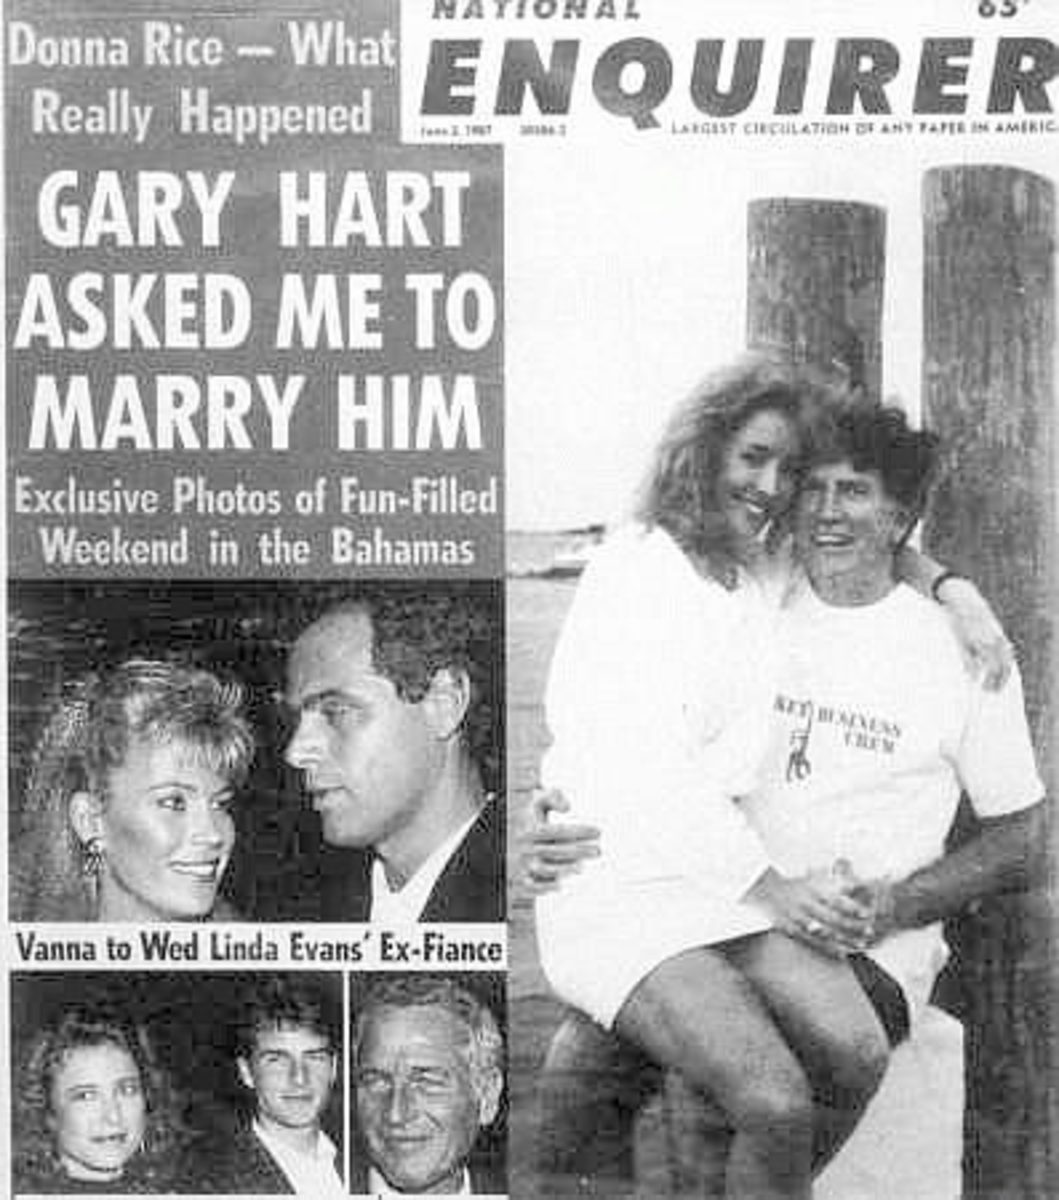 Gary Hart’s presidential campaign was scuttled on Bimini.